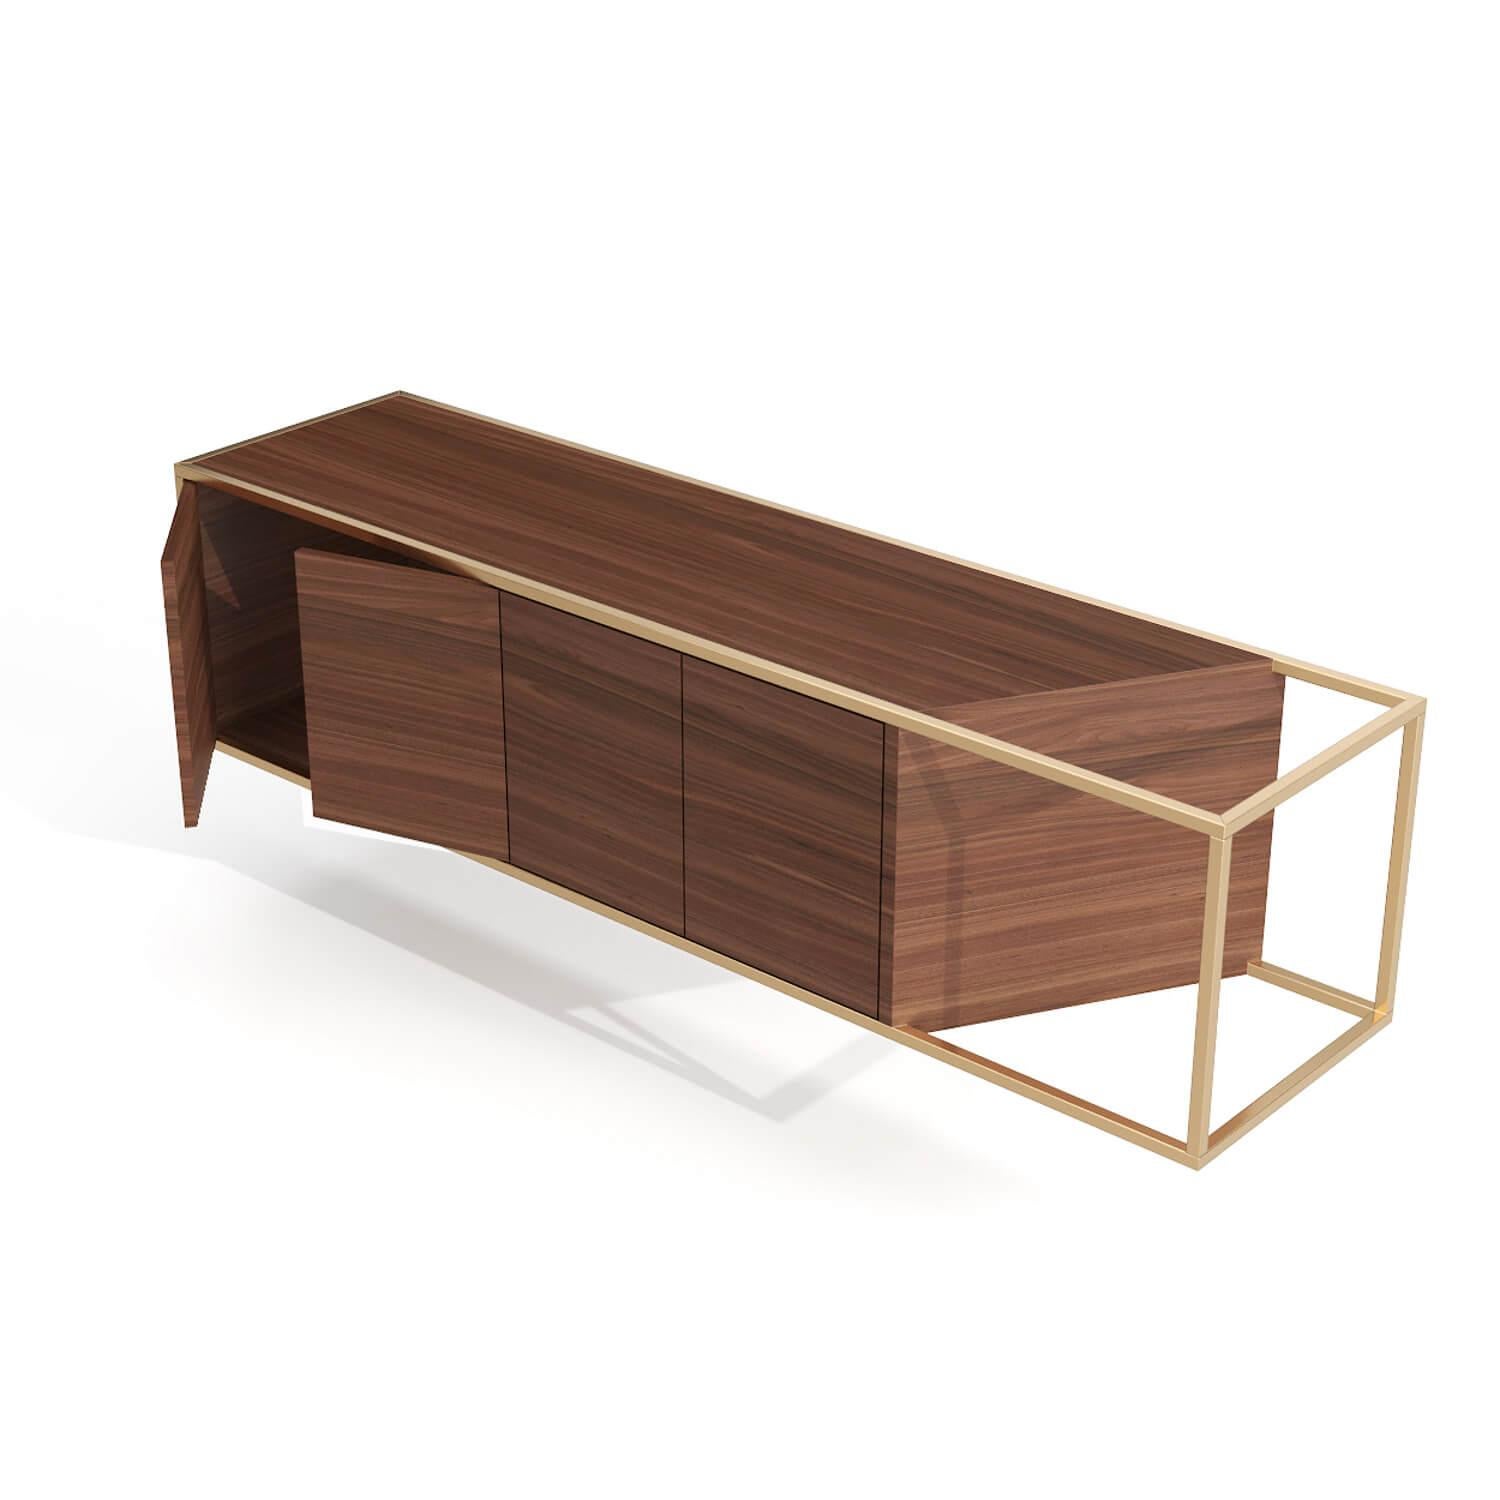 Modern Minimalist Suspended Credenza Sideboard in Walnut Wood and Brushed Brass In New Condition For Sale In Vila Nova Famalicão, PT